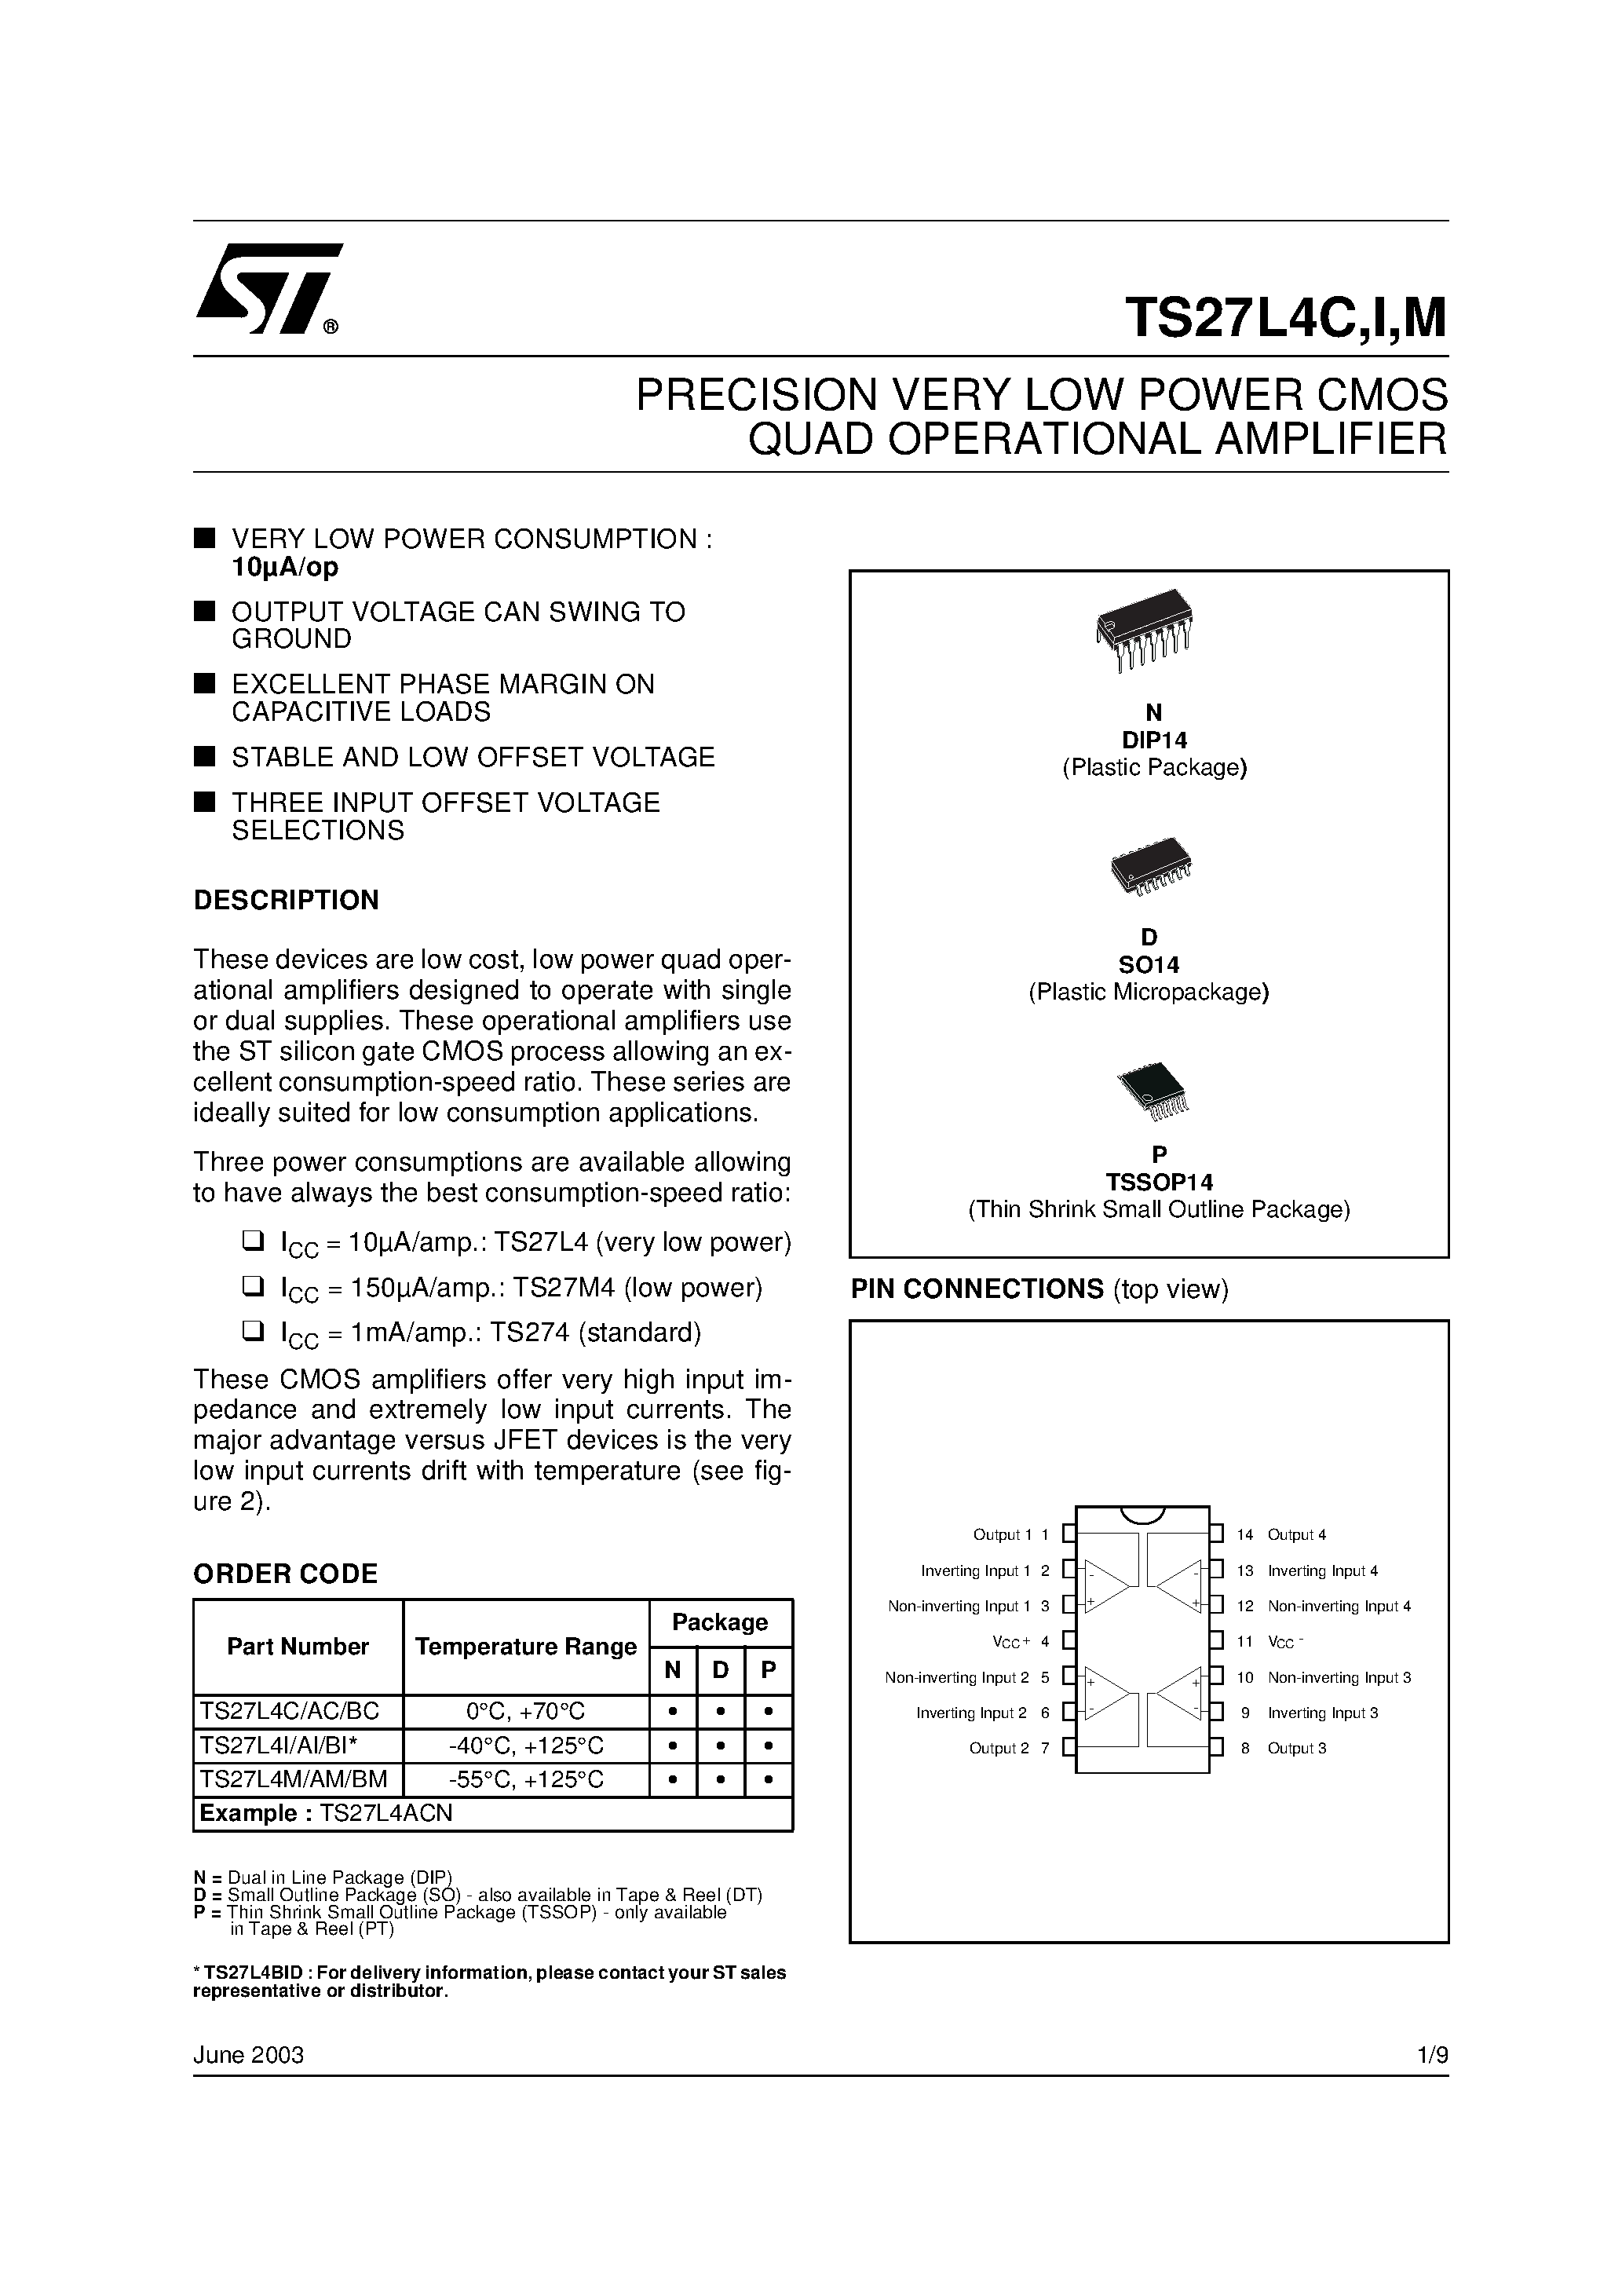 Datasheet TS27L4BC - PRECISION VERY LOW POWER CMOS QUAD OPERATIONAL AMPLIFIER page 1